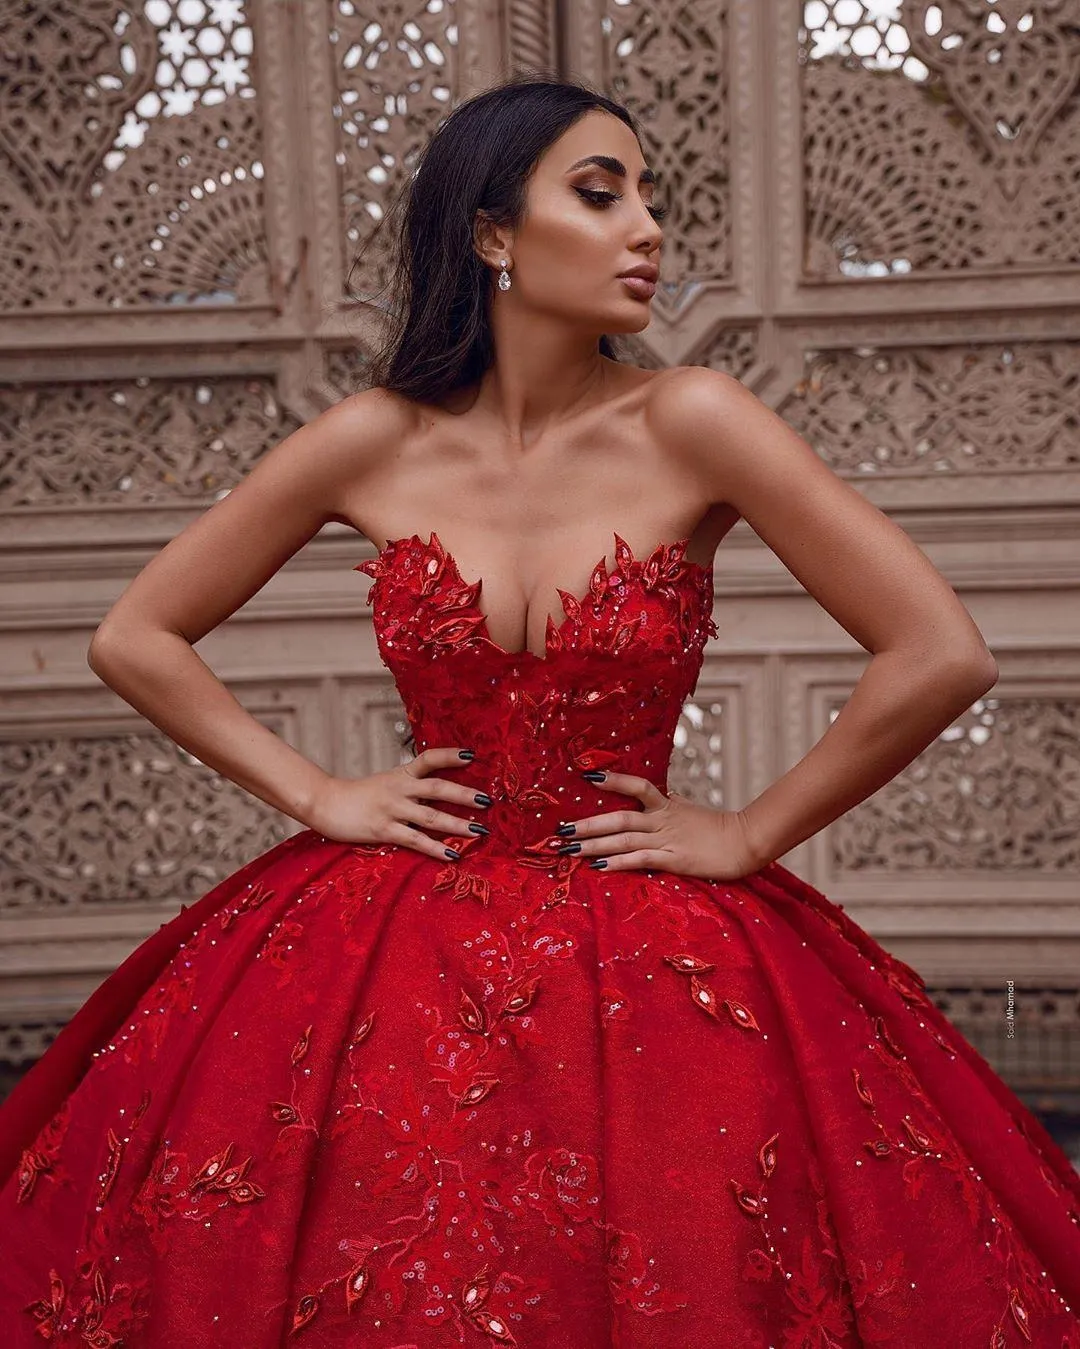 Woman wearing red gown looking out window | Beautiful dresses, Gowns, Ball  gowns